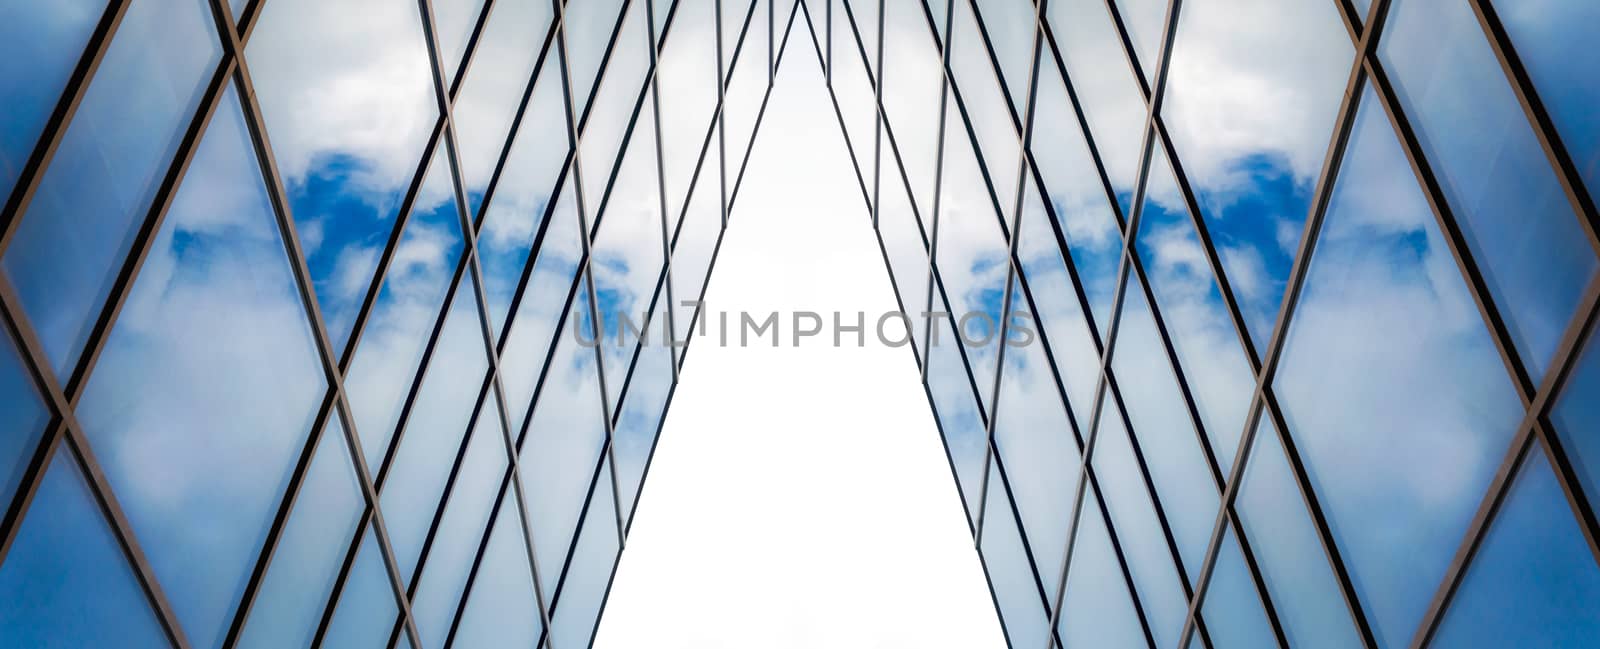 reflection of blue sky with white clouds in a window of a tall office building abstract architectural background